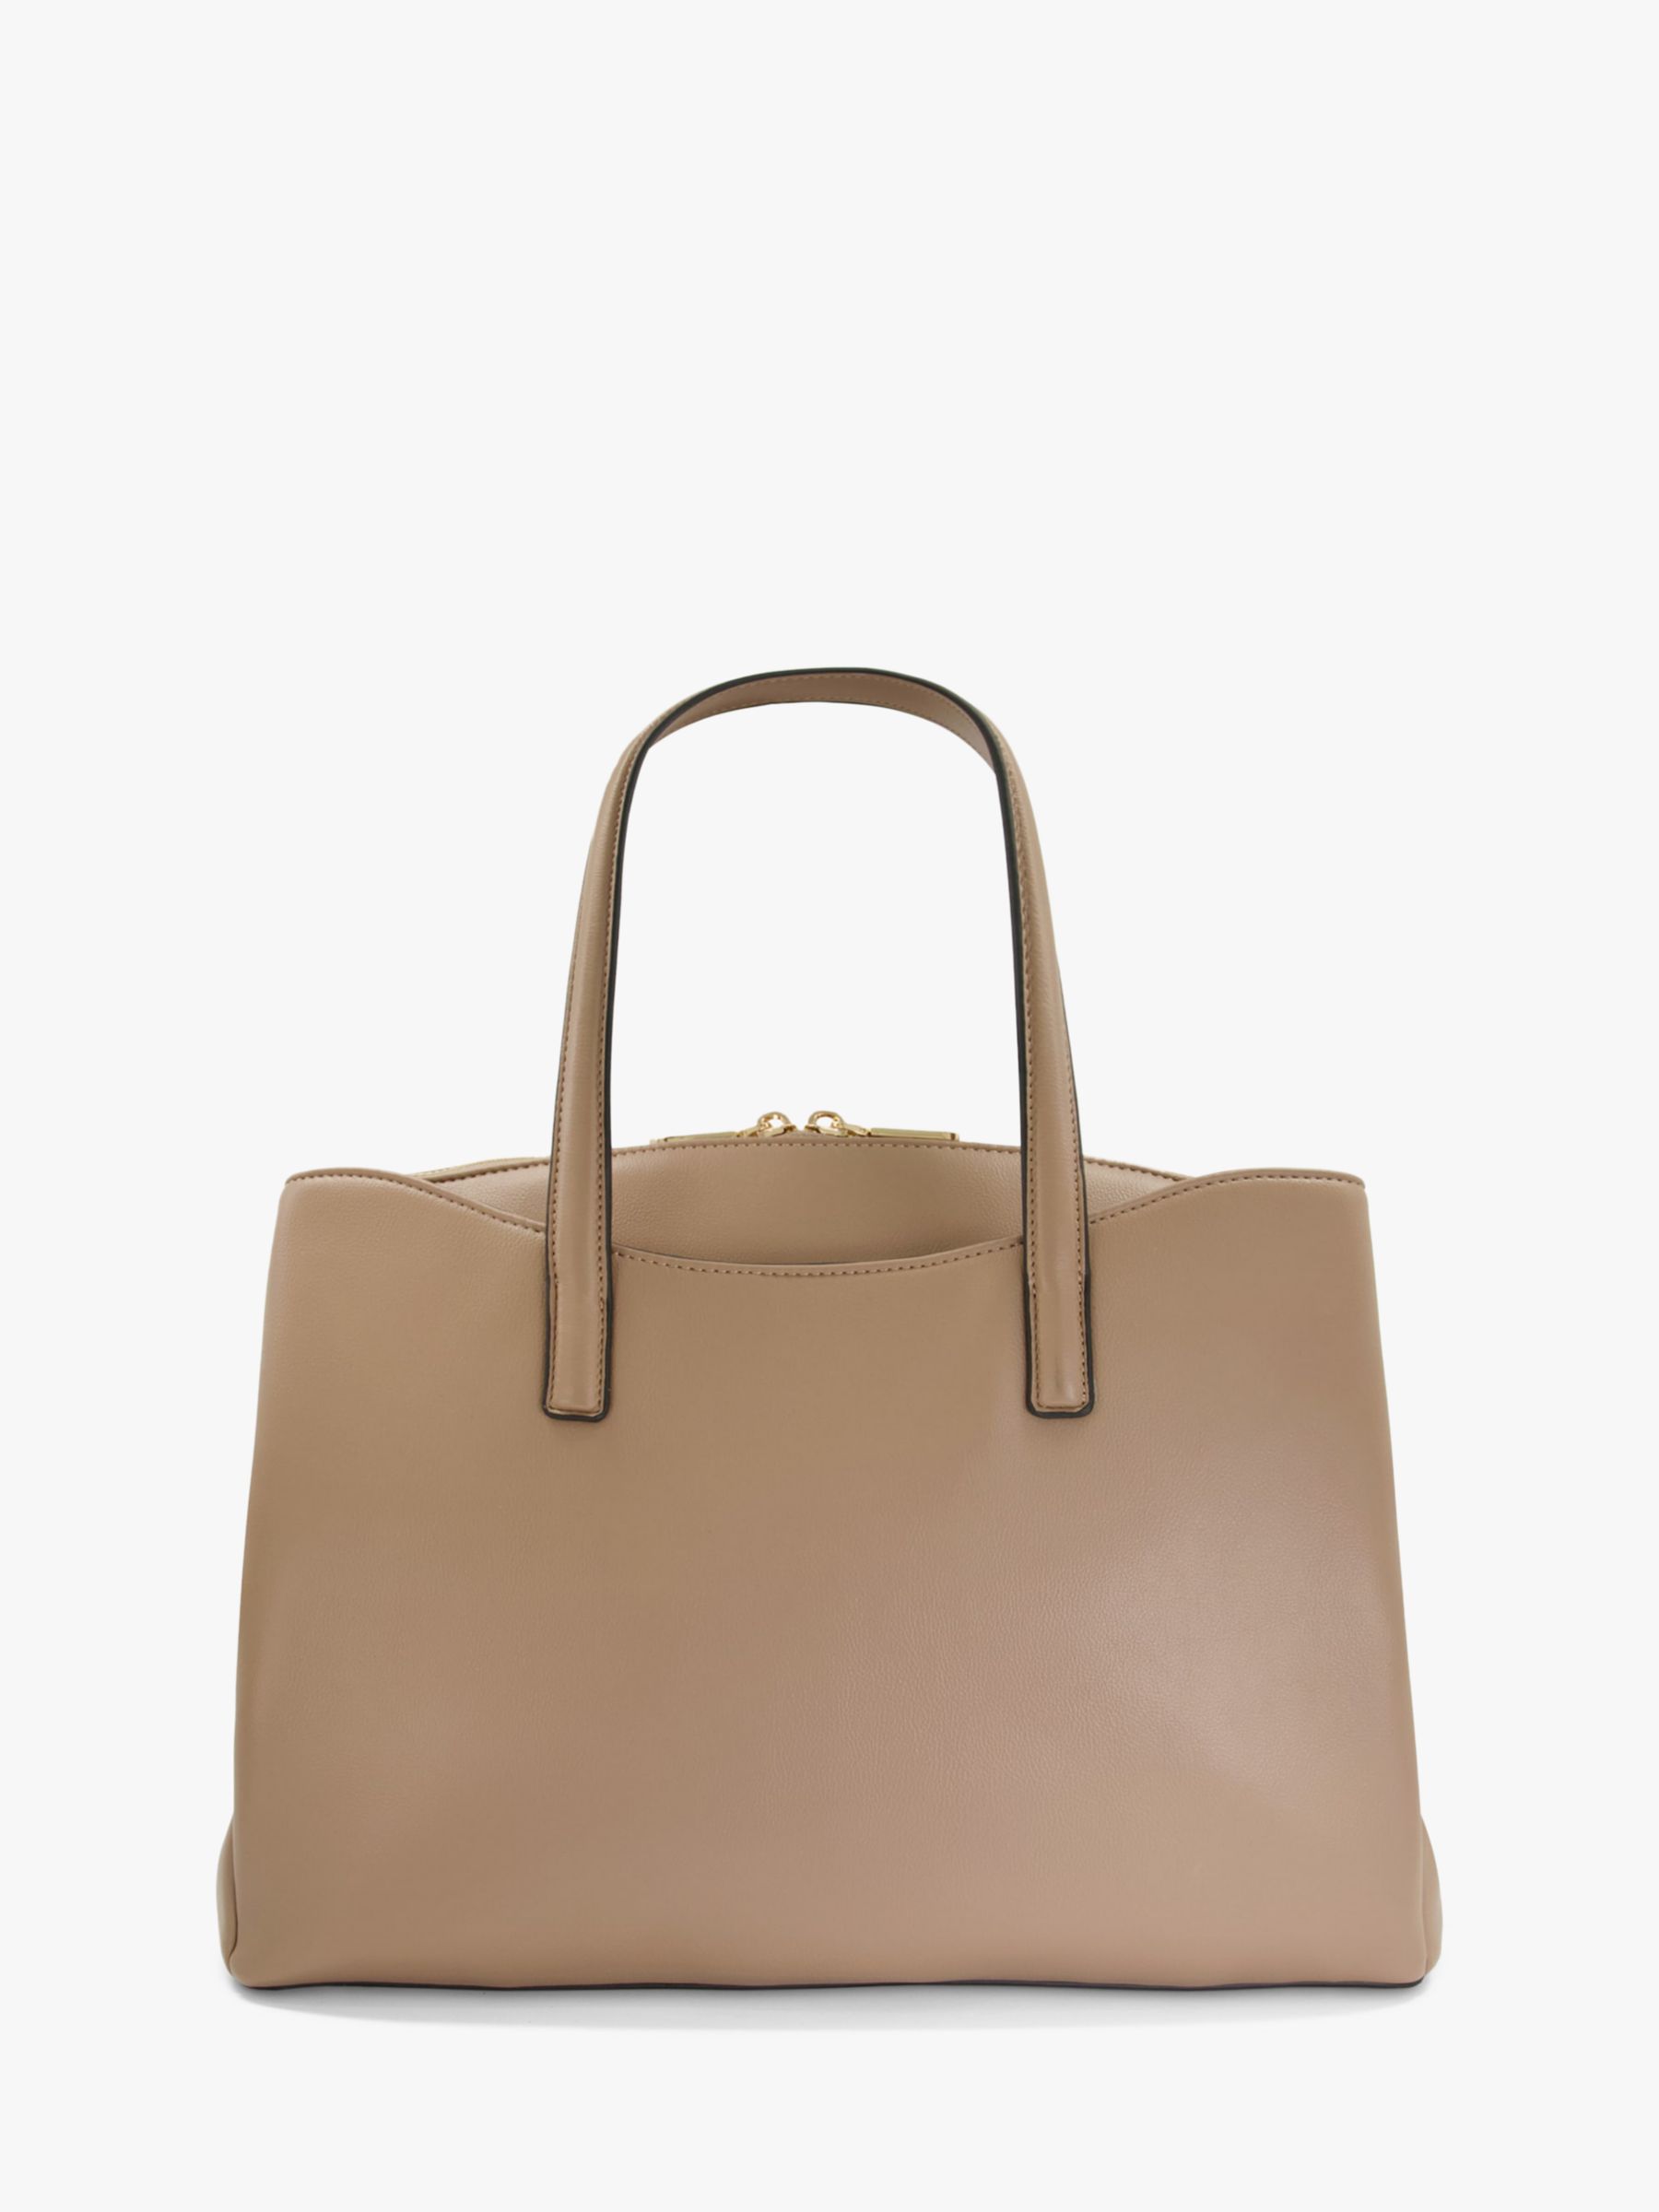 Dune Dignify Large Quilted Tote Bag, Taupe at John Lewis & Partners